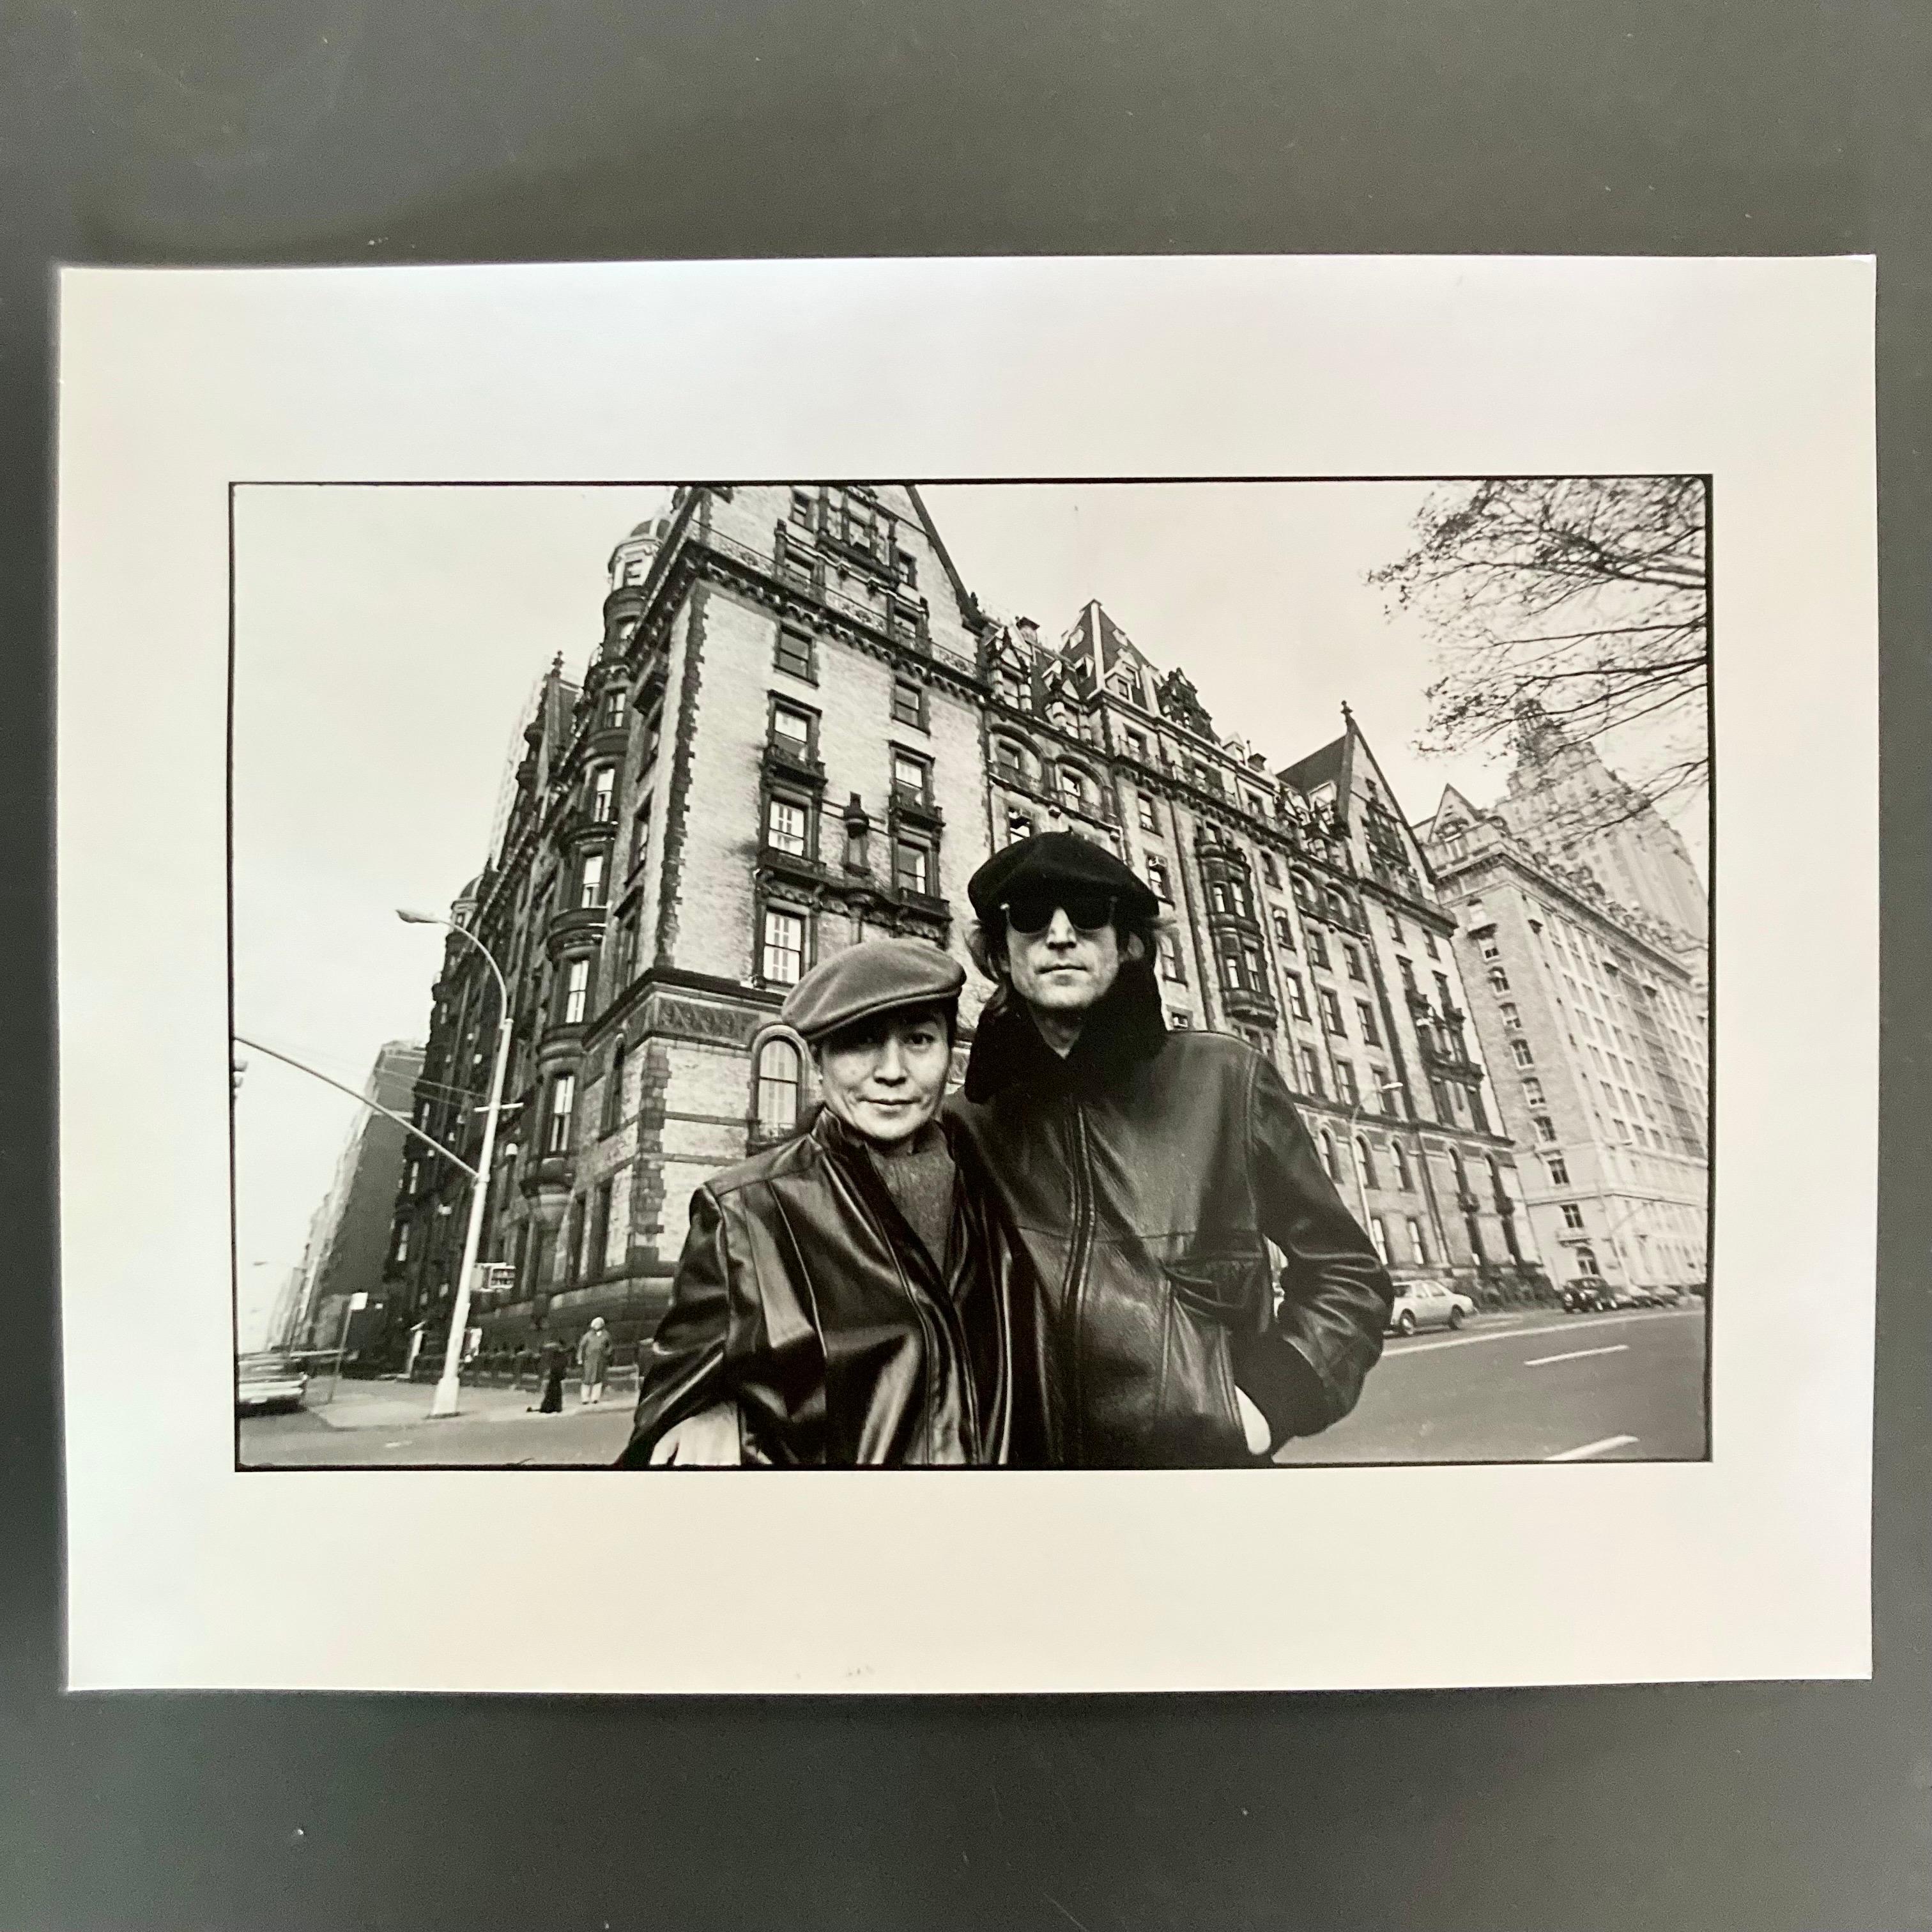 Vintage darkroom print of John Lennon and Yoko Ono taken outside the Dakota Building on November 21st 1980. This print is an original, hand printed darkroom print made by the photographer Allan Tannenbaum. 

This vintage 11x14" print is signed and